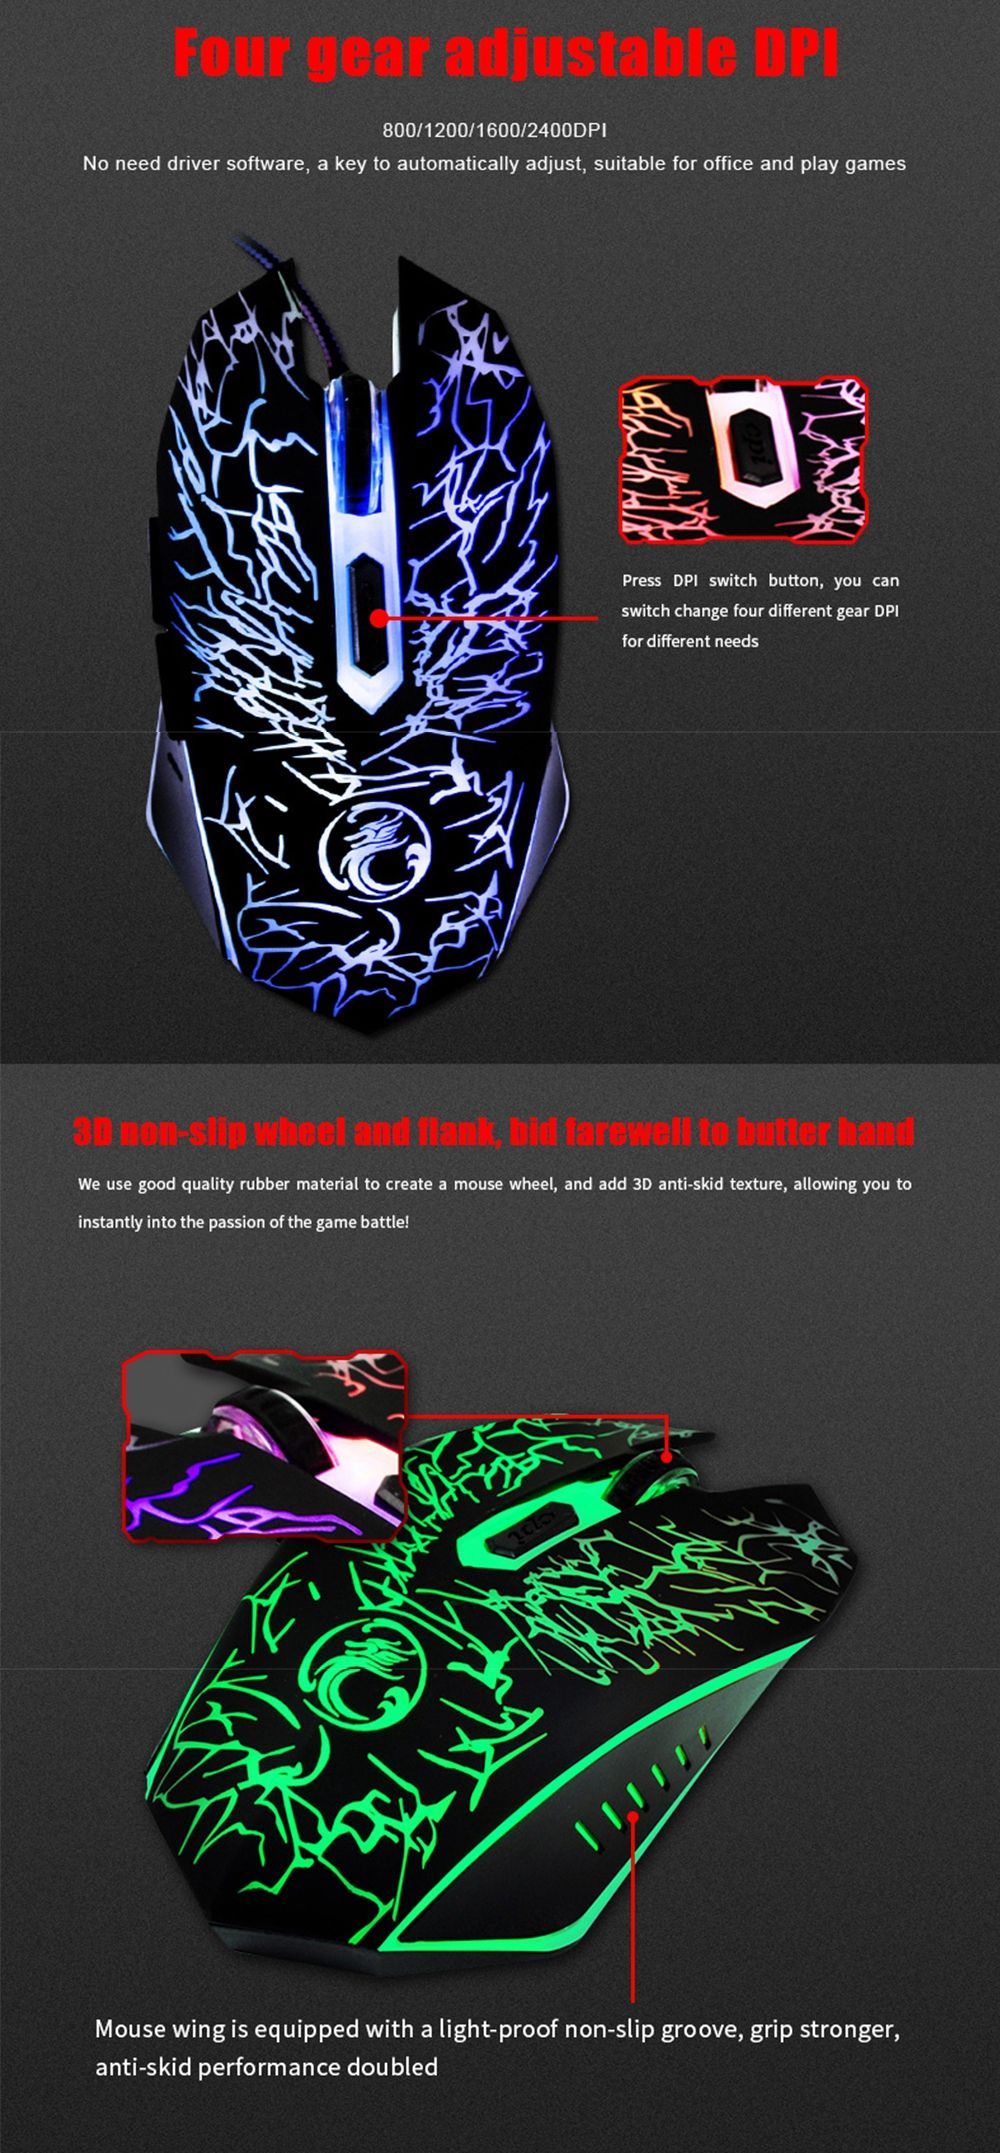 IMICE-X5-6-Buttons-7-Colorful-LED-Breathing-Light-Optical-USB-Wired-Gaming-Mouse-for-PC-1576774